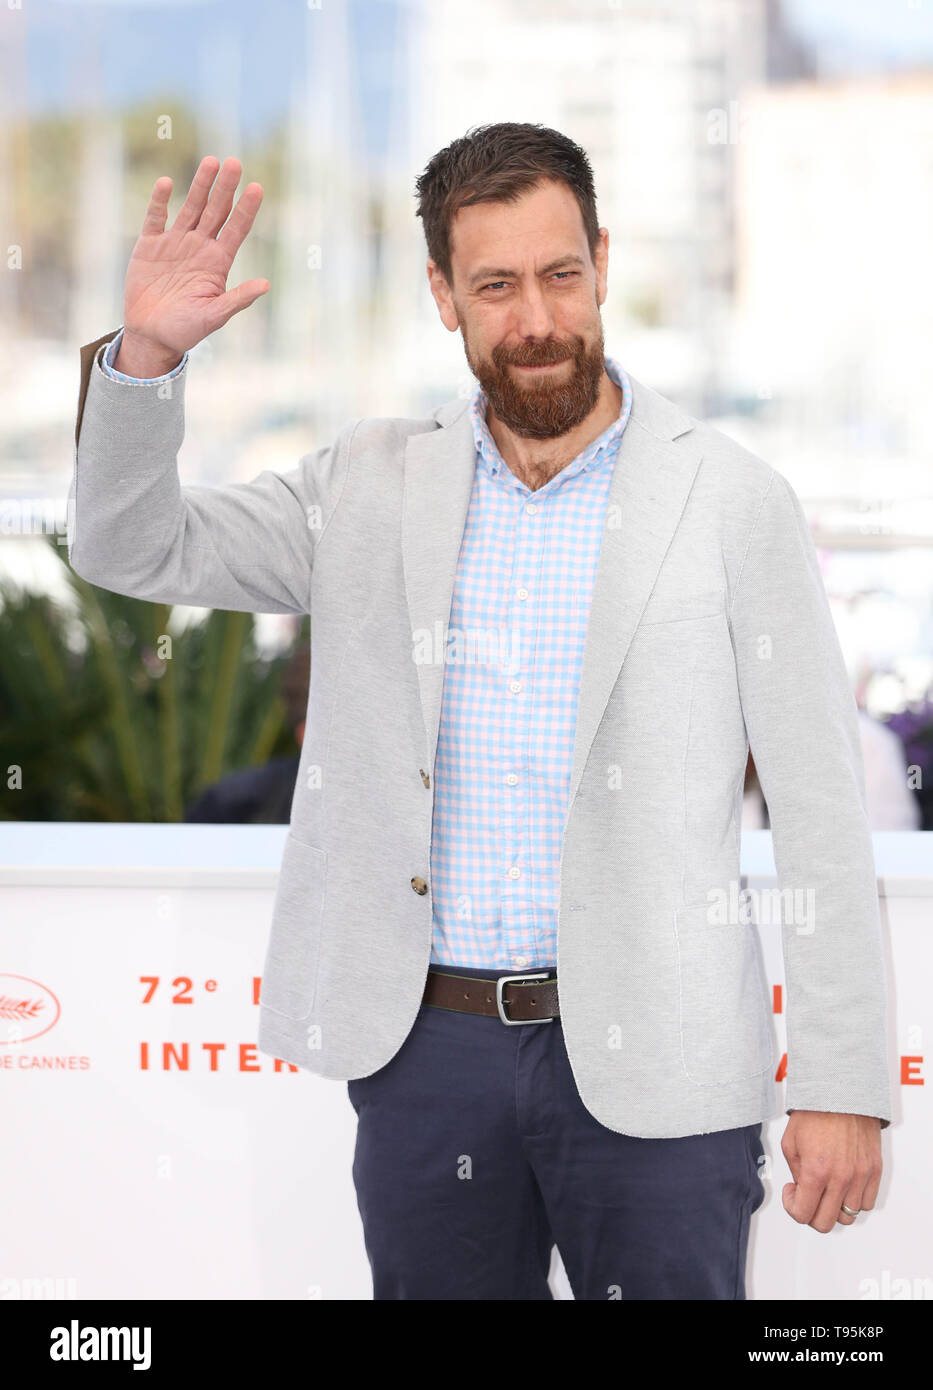 (190516) -- CANNES, May 16, 2019 (Xinhua) -- Director Dan Krauss poses during a photocall for the film "5B" screened in Special Screenings during the 72nd Cannes Film Festival in Cannes, France, May 16, 2019. (Xinhua/Gao Jing) Stock Photo